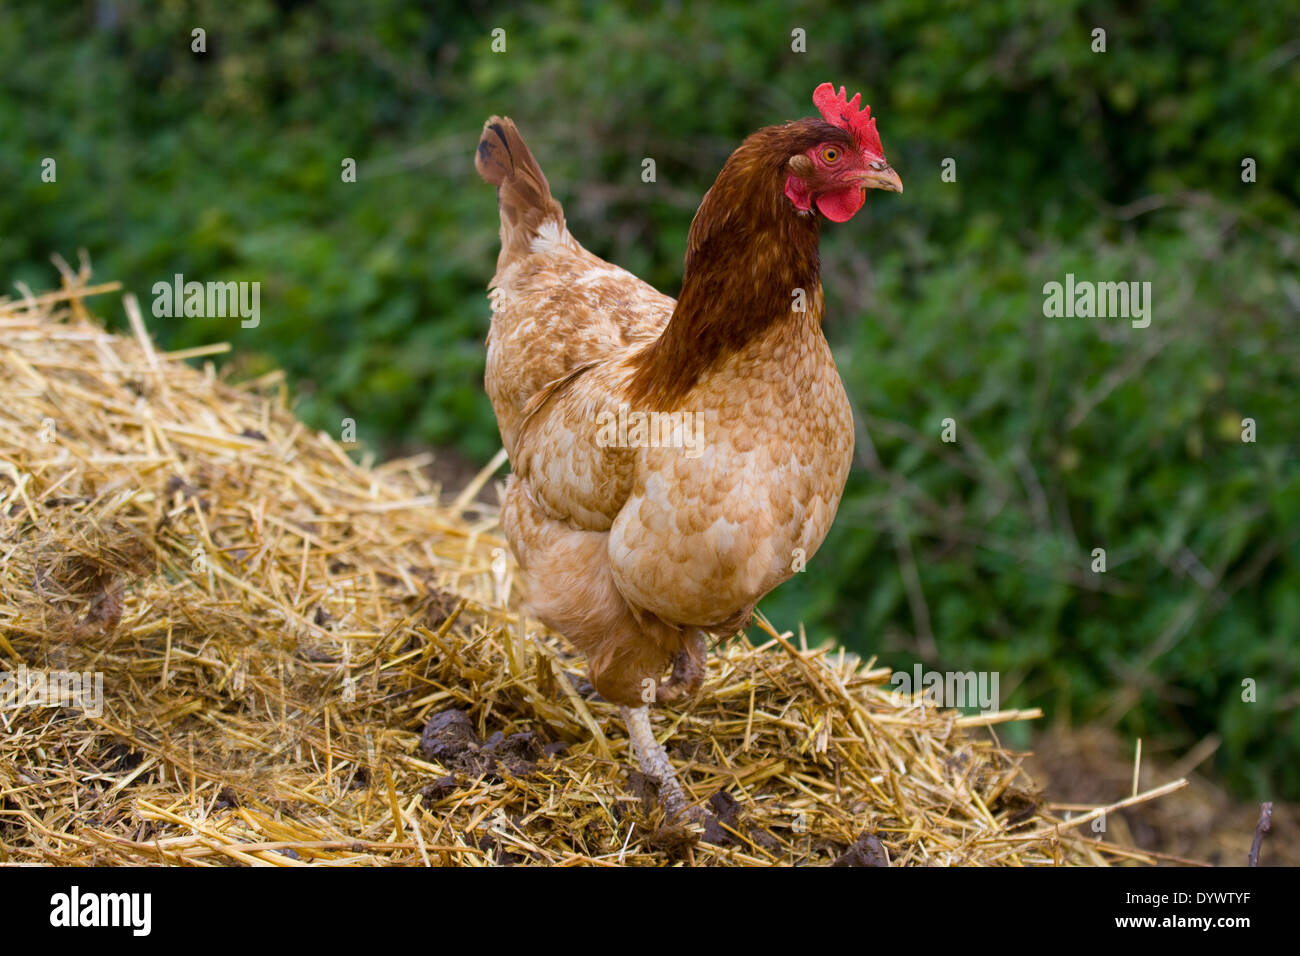 Brown Hen perched on pile of straw. UK Stock Photo